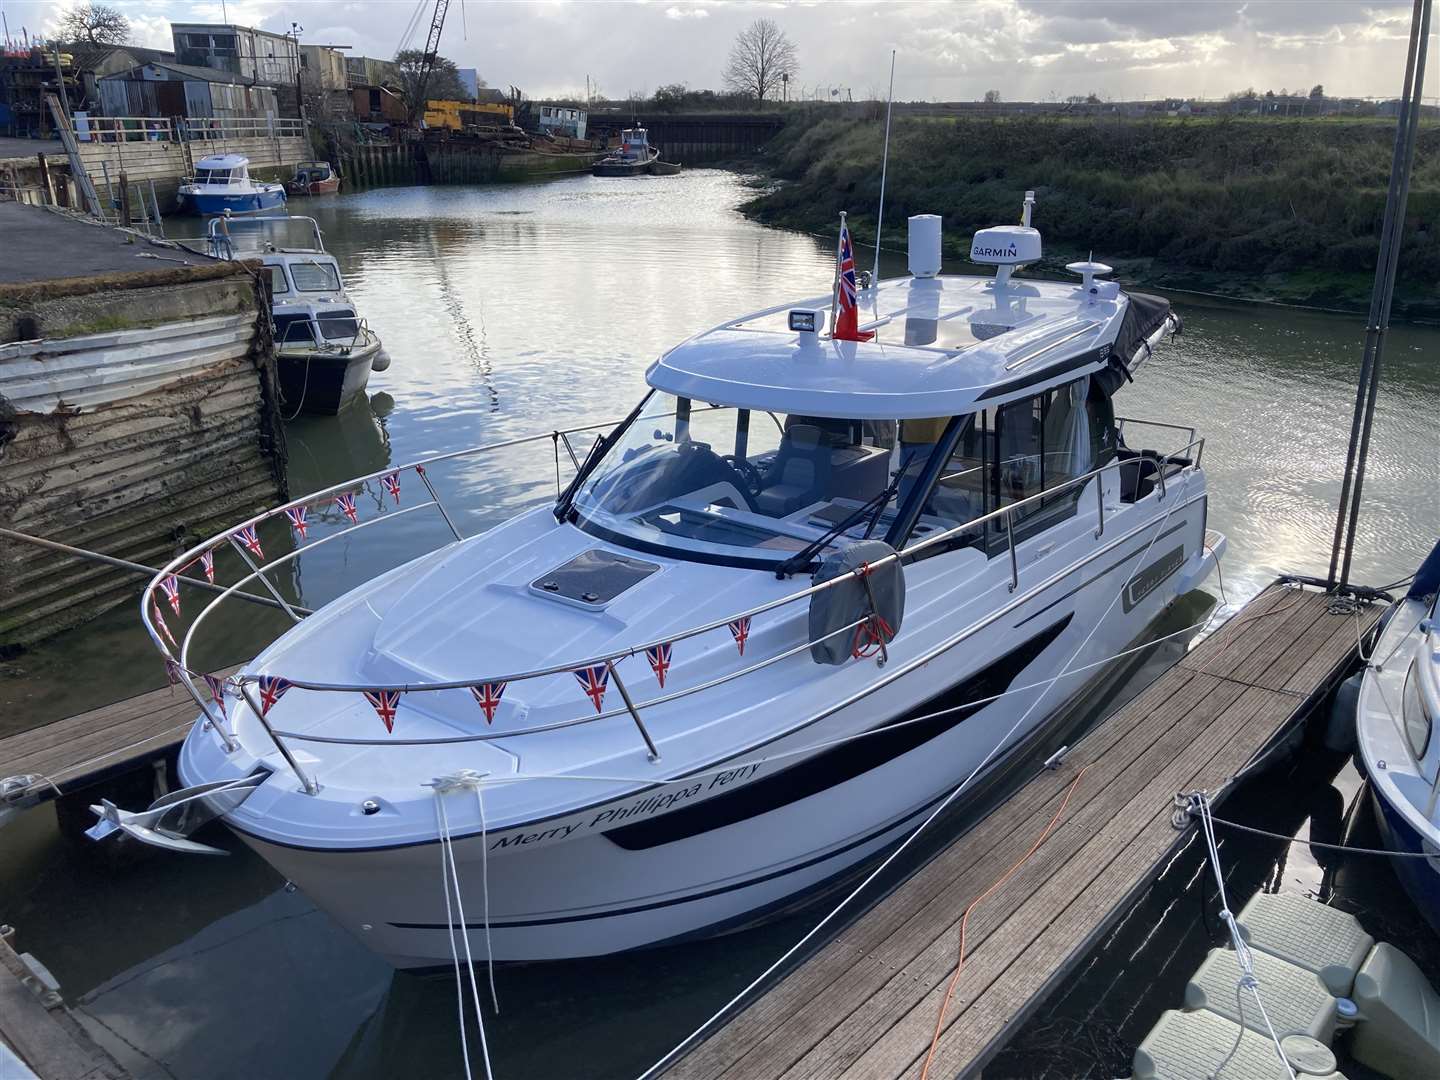 The £185k Merry Phillippa ferry which will be linking Sheppey to Southend